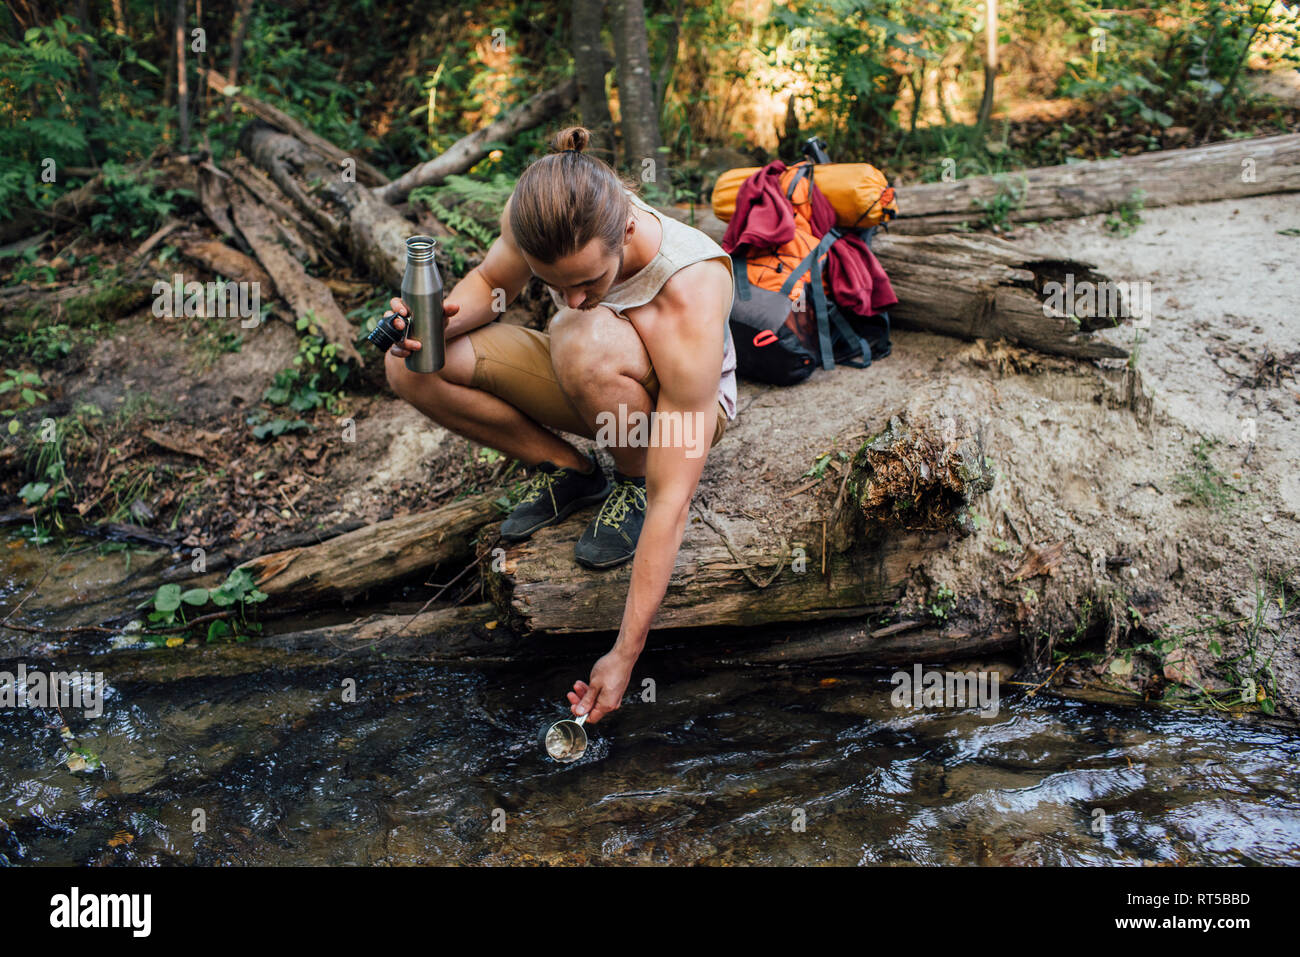 Young hiker scooping fresh water in a forest Stock Photo